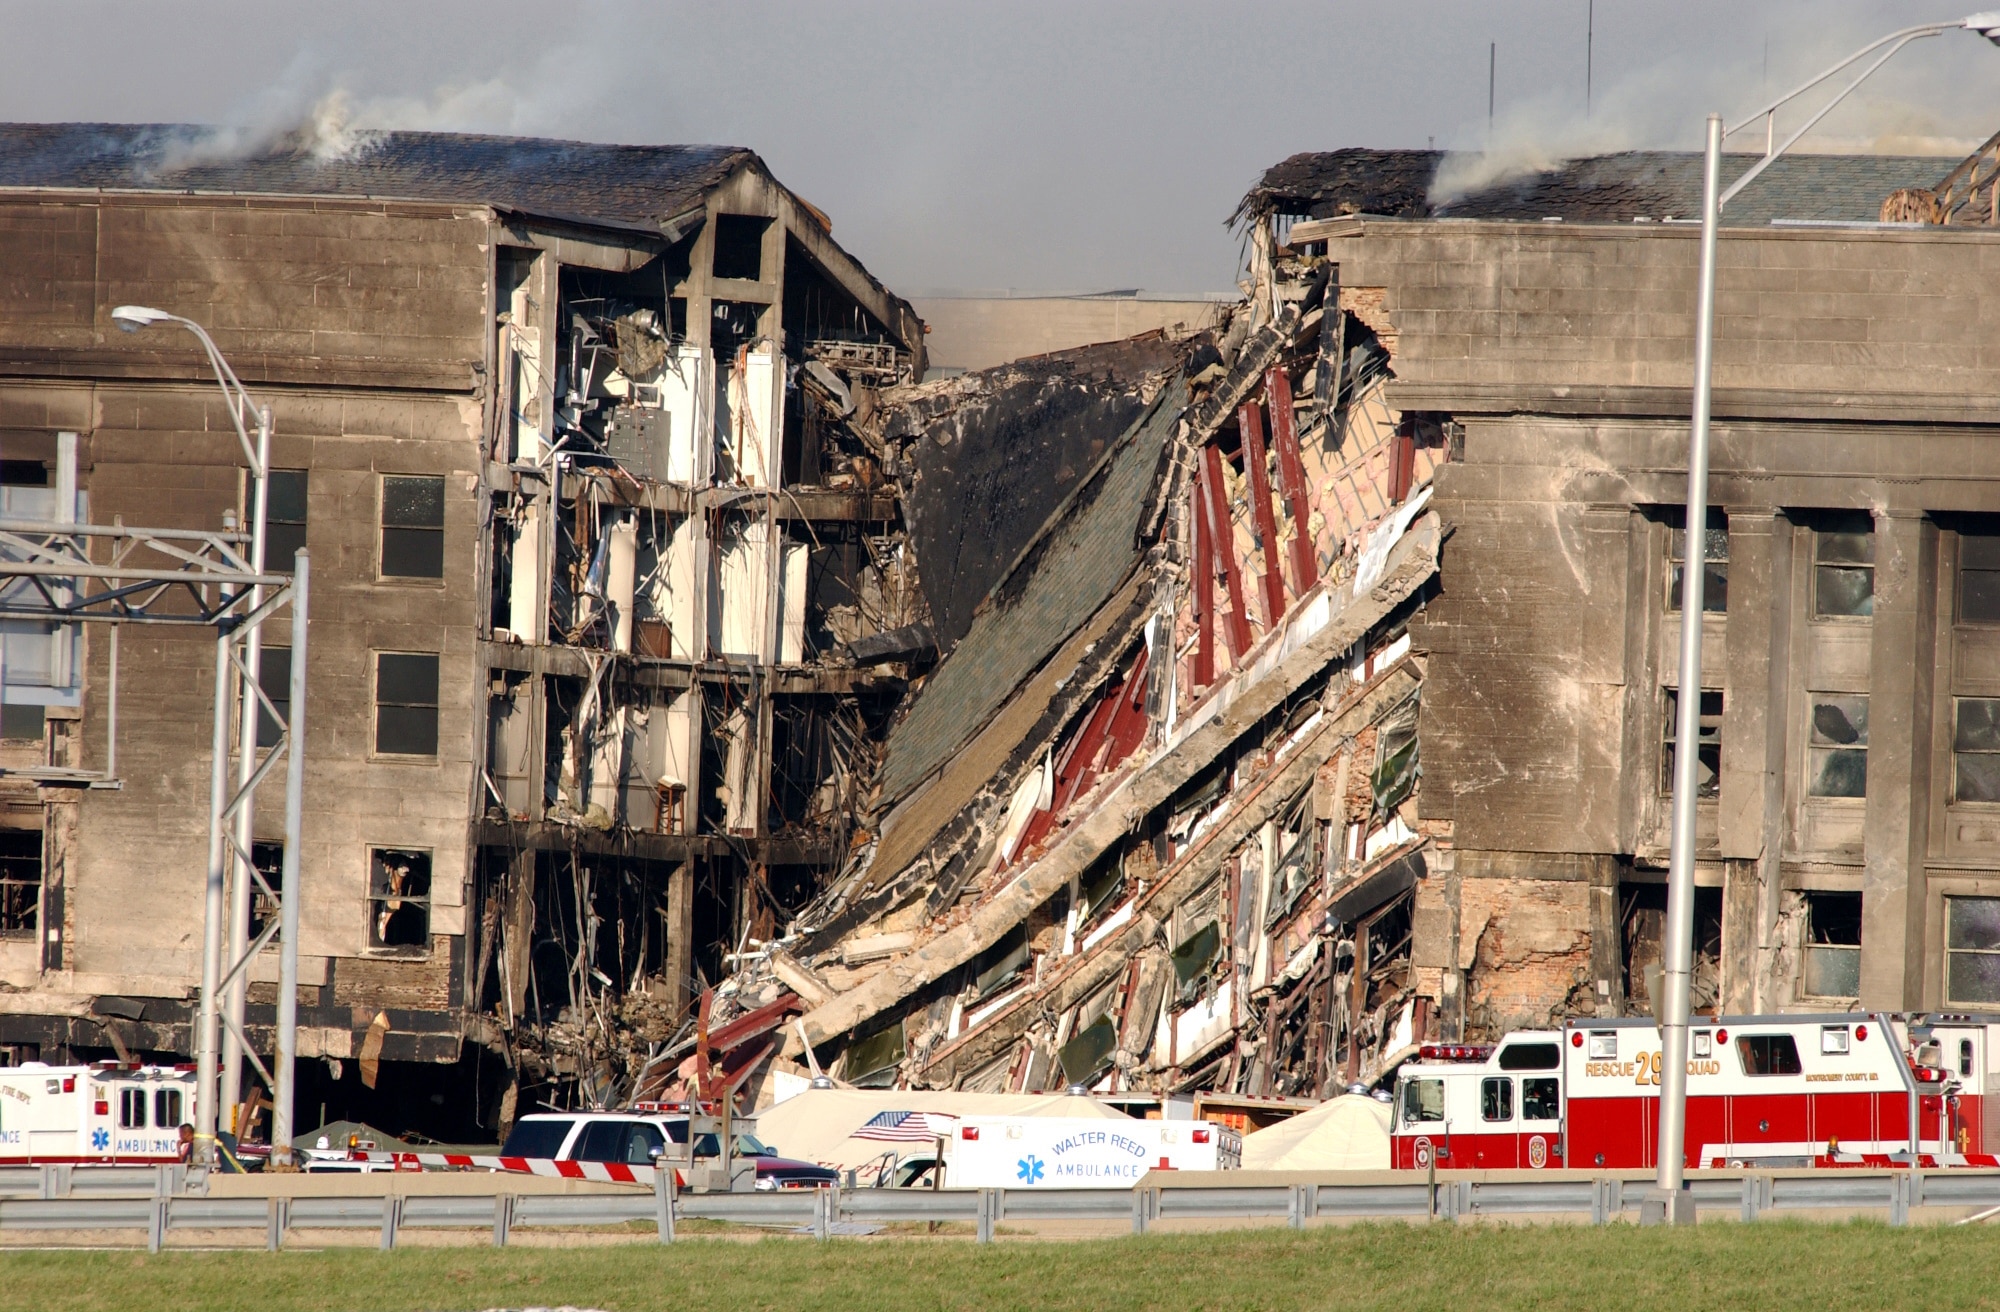 A 200-foot gash exposes interior sections of the Pentagon following a suspected terrorist crash of a commercial airliner into the southwest corner of the building. Part of the building has collapsed meanwhile firefighters continue to battle the flames and look for survivors. An exact number of casualties are unknown. The building was evacuated, as were the federal buildings in the Capitol area, including the White House. (U.S. Navy Photo/Photographers Mate 2nd Class Bob Houlihan) 